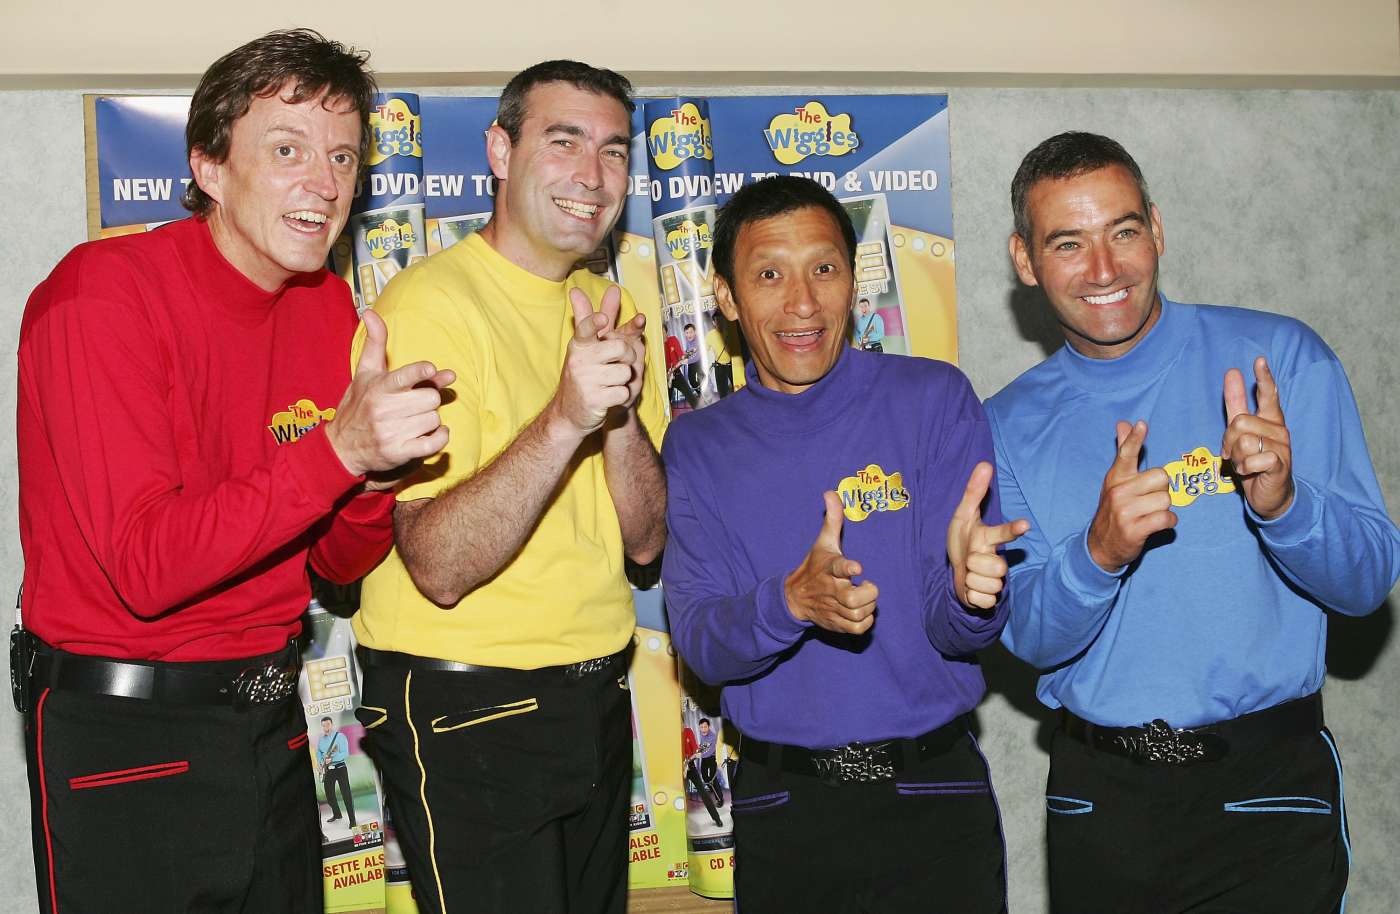 The+Wiggles+show+how+different+generations+pose+%26%238211%3B+The+Cairns+Post